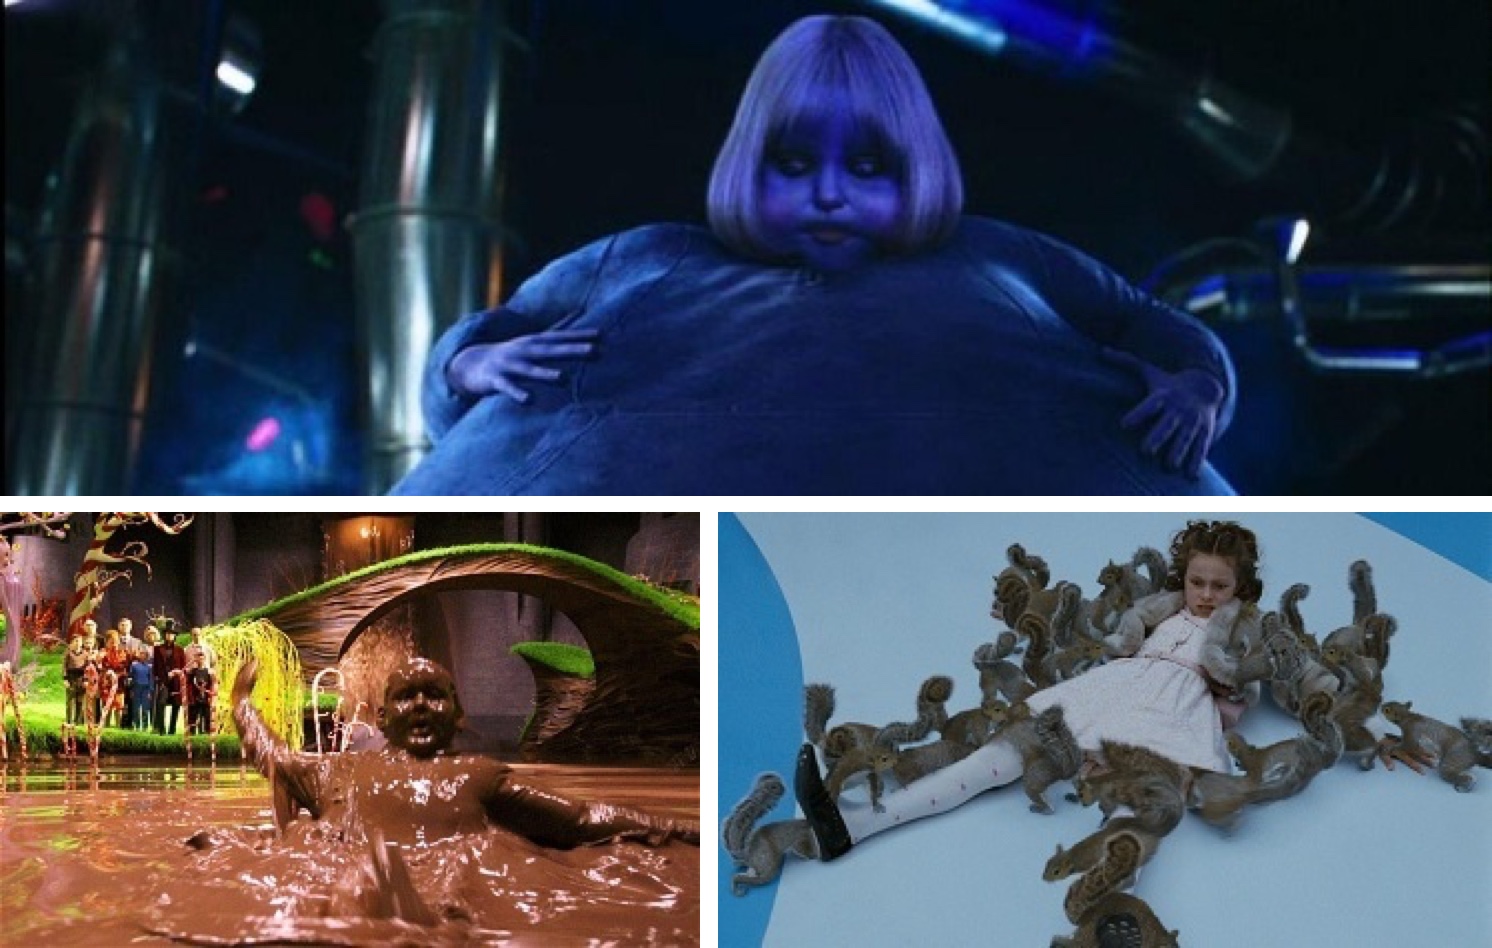 From Tim Burton's version of Charlie and the Chocolate Factory